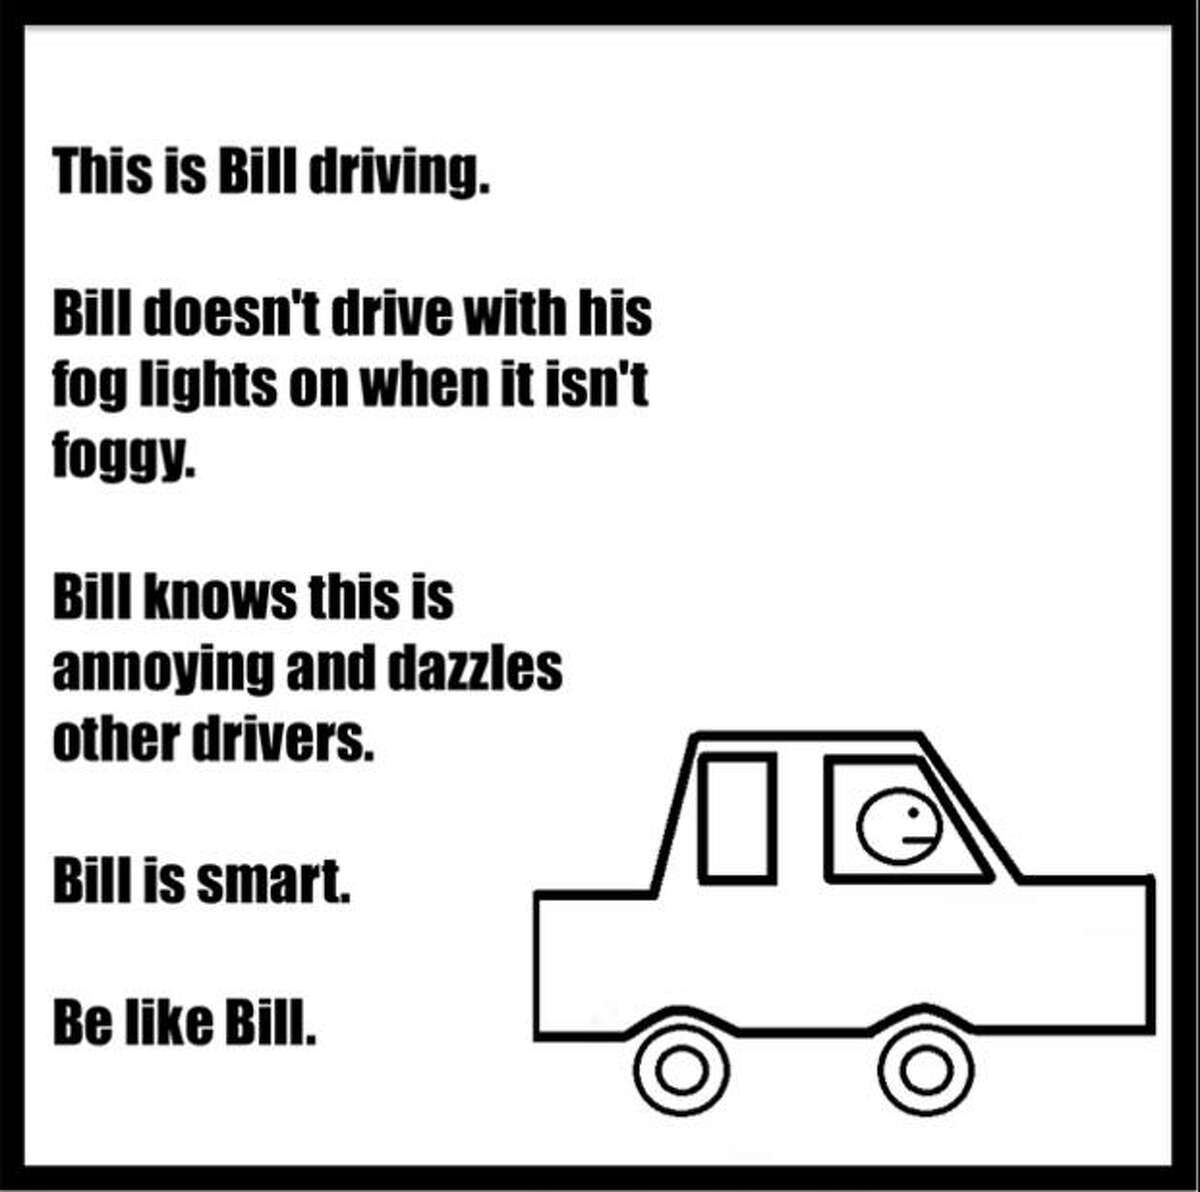 Be Like Bill Memes Call Out Annoying Habits In The Most Passive Aggressive Way